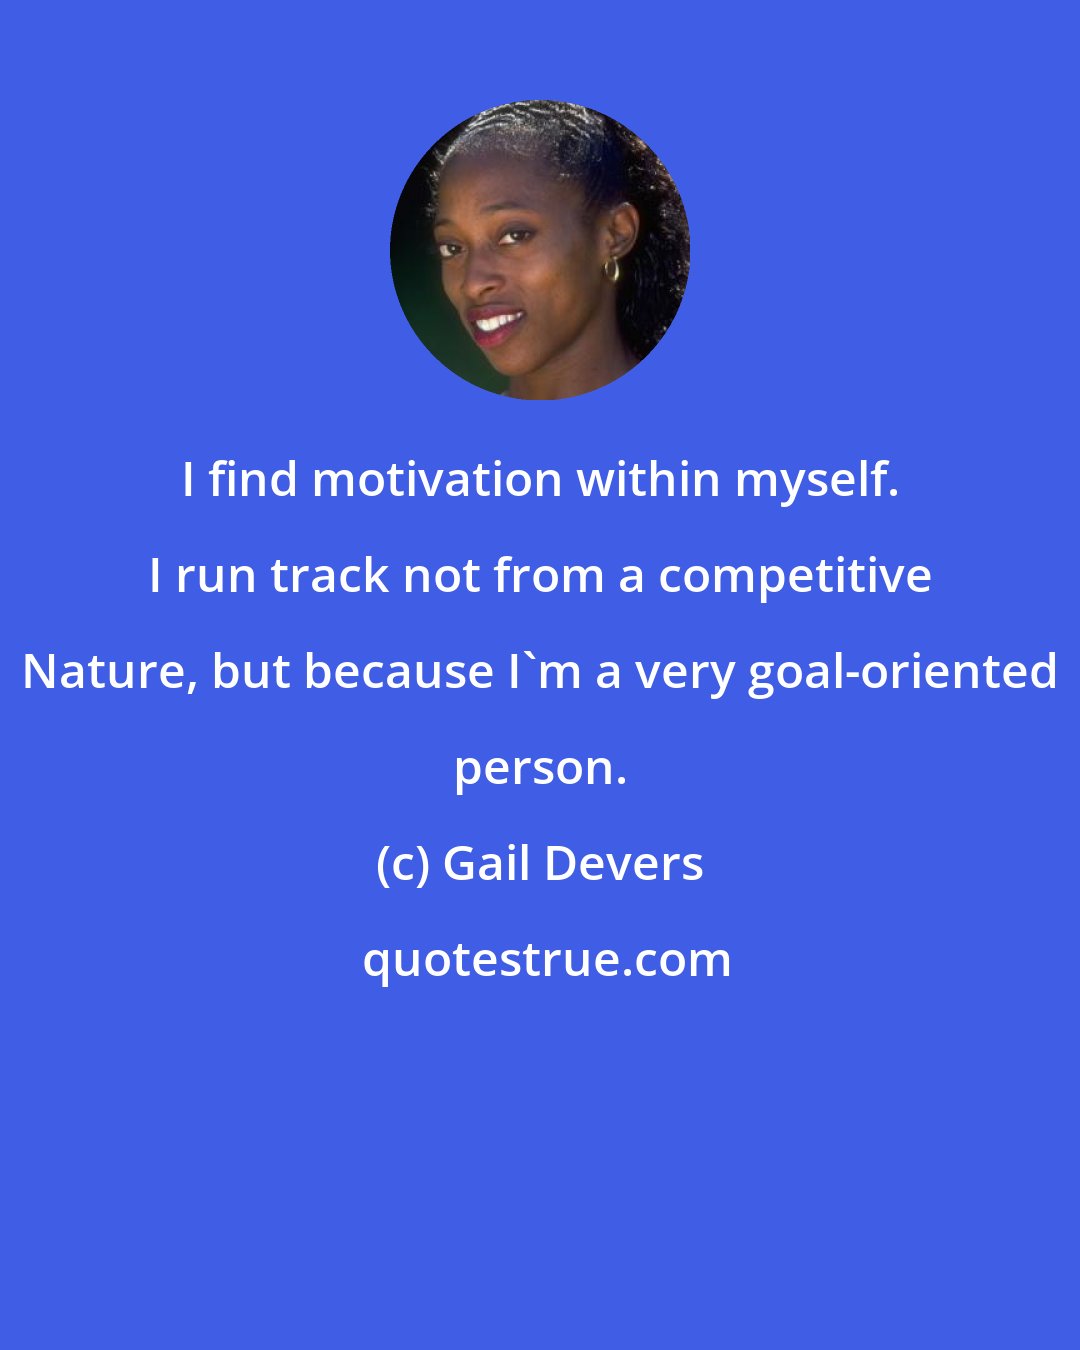 Gail Devers: I find motivation within myself. I run track not from a competitive Nature, but because I'm a very goal-oriented person.